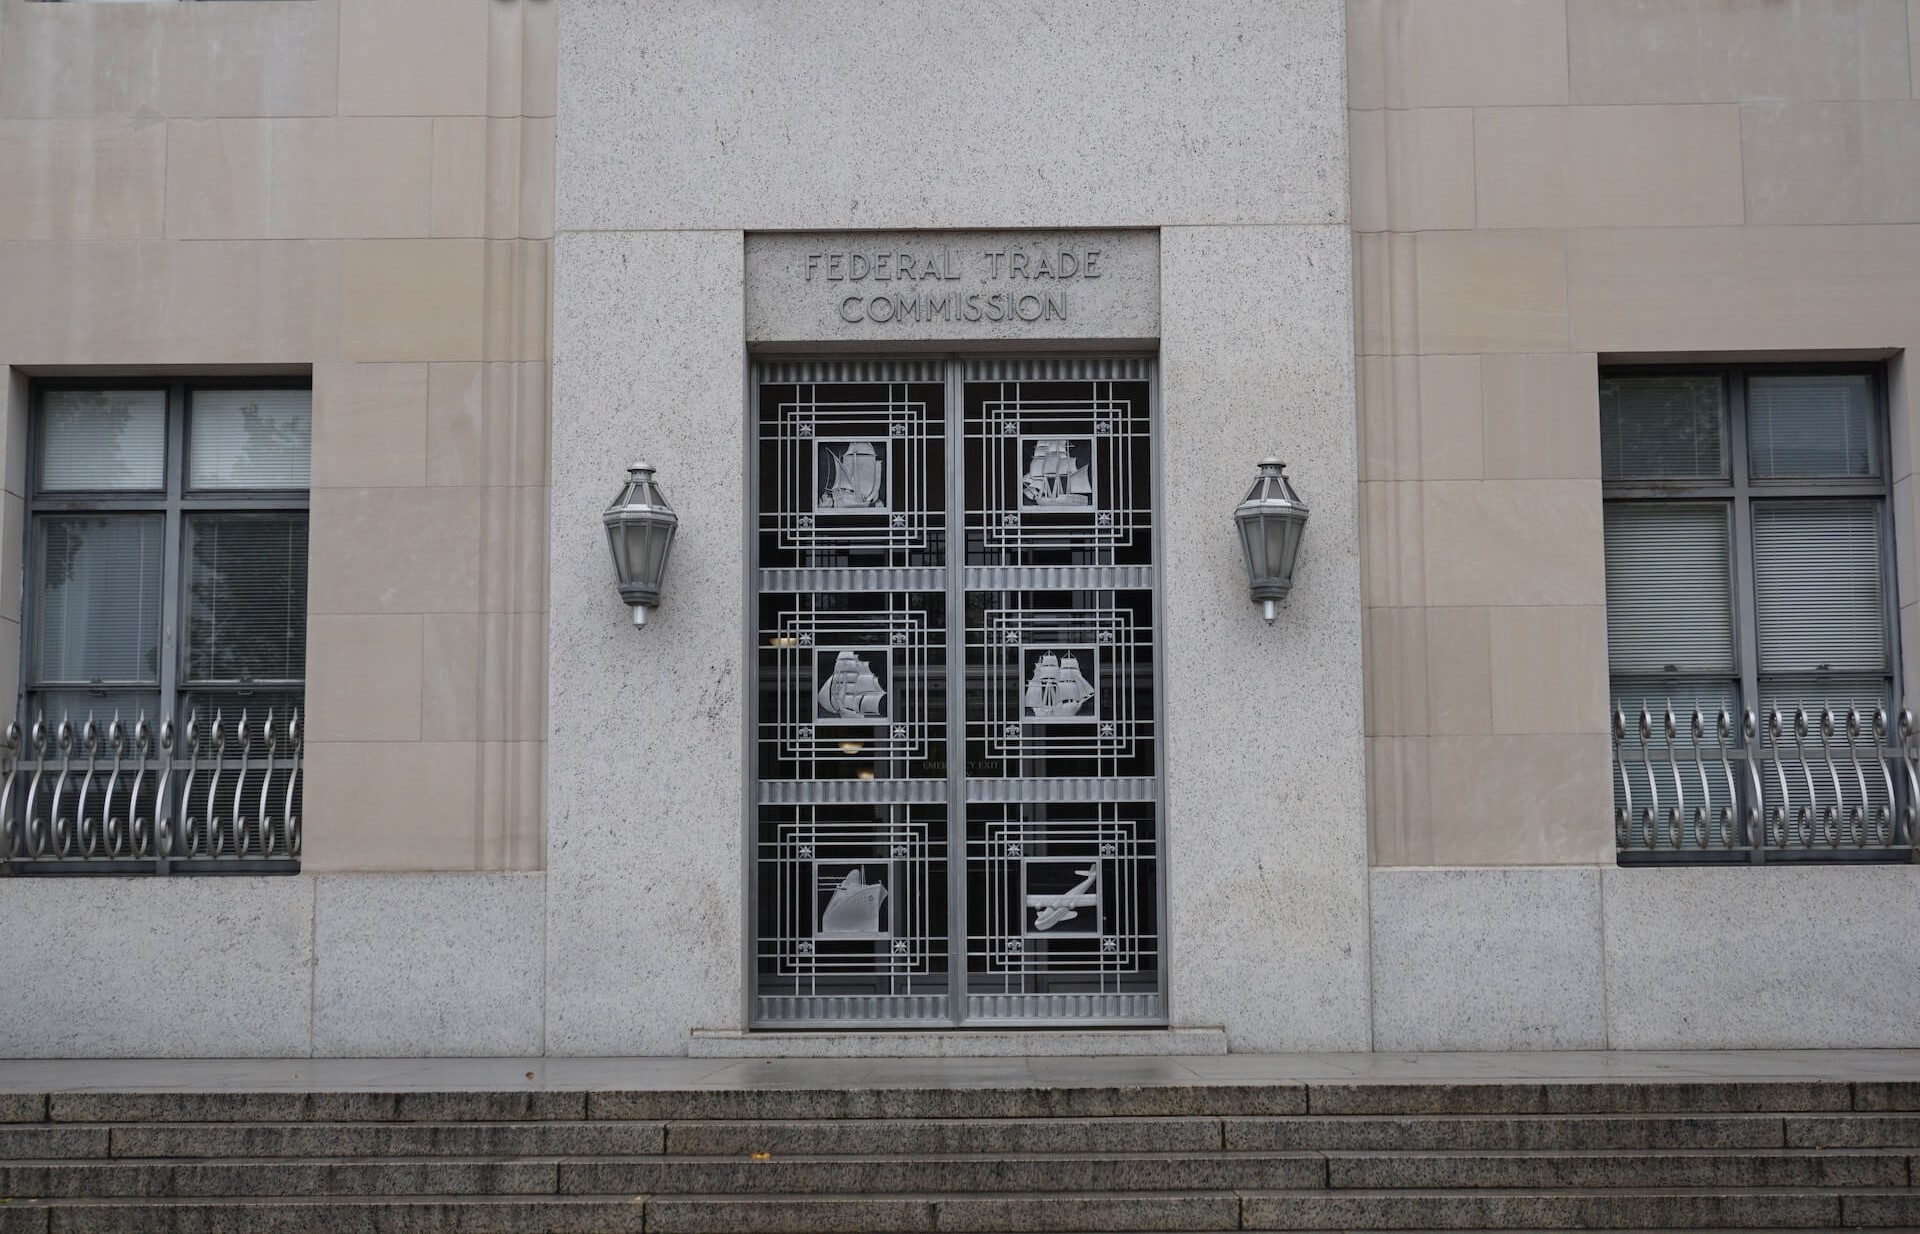 The Federal Trade Commission Building in Washington, DC